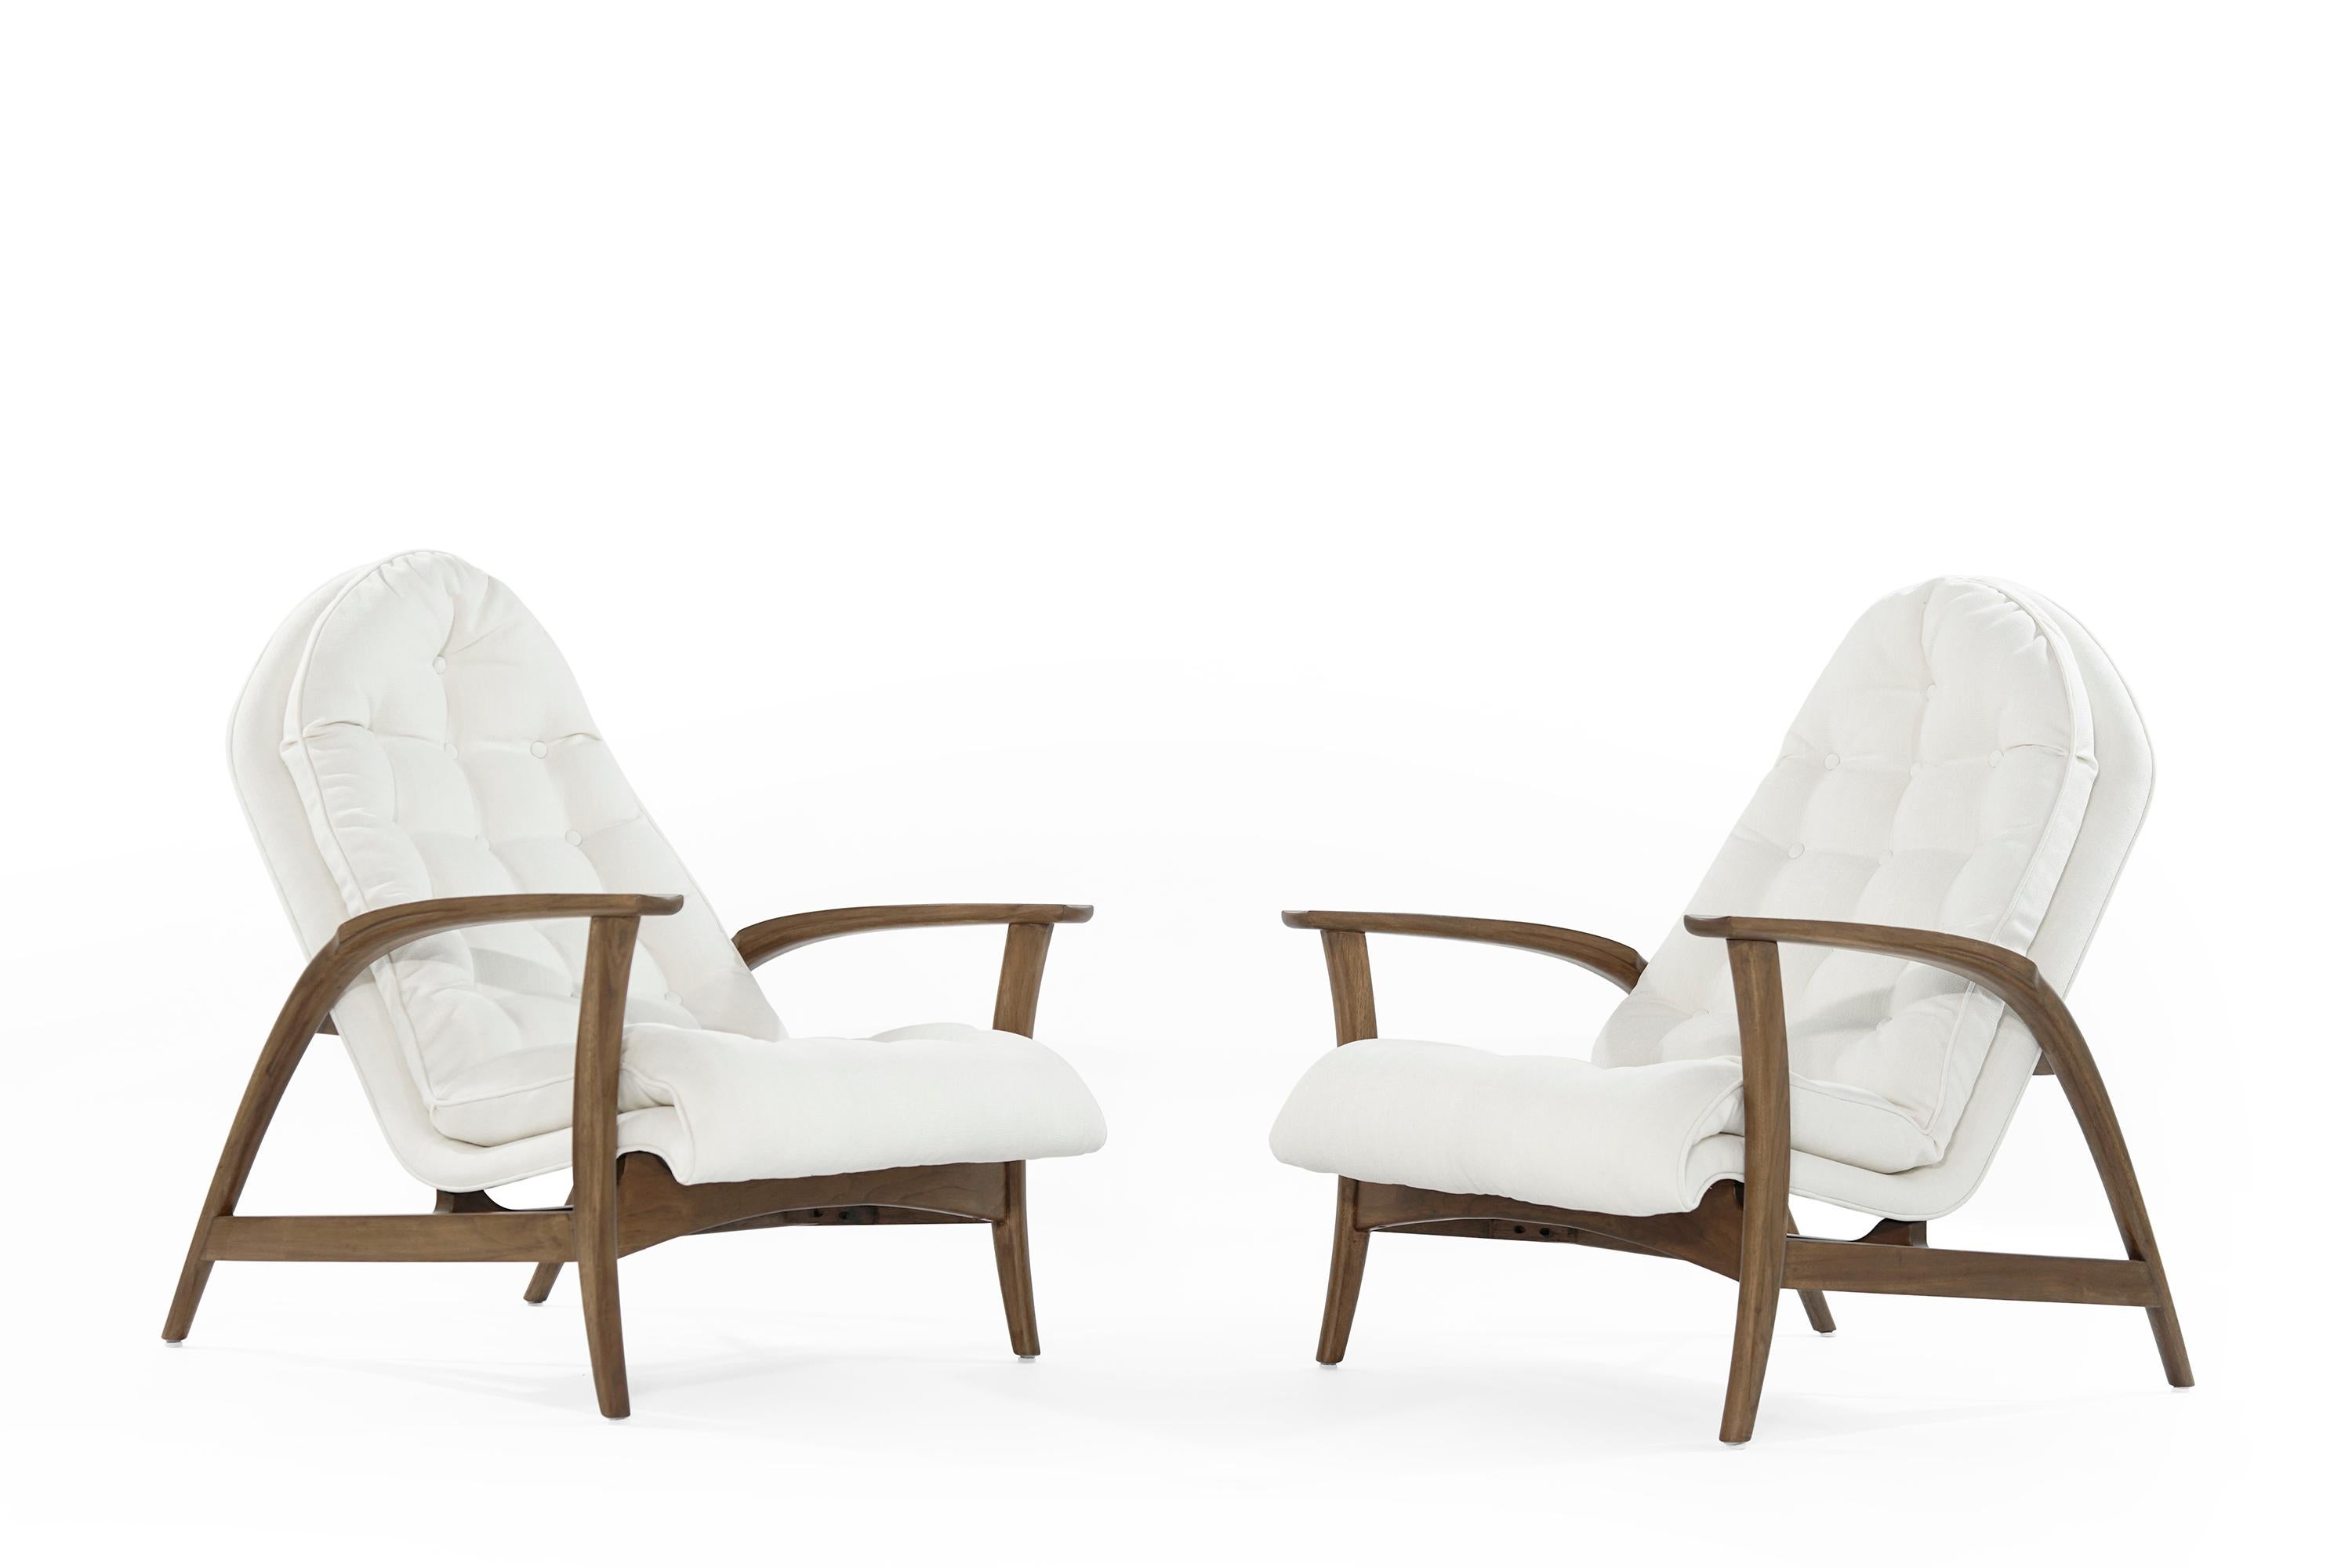 Exceptional set of lounge chairs in the style of Finn Juhl original from Denmark, circa 1960s. Featuring fully restored sculptural teak framing. Tufted seats and backrest newly upholstered in linen by Kravet. Priced as pair.